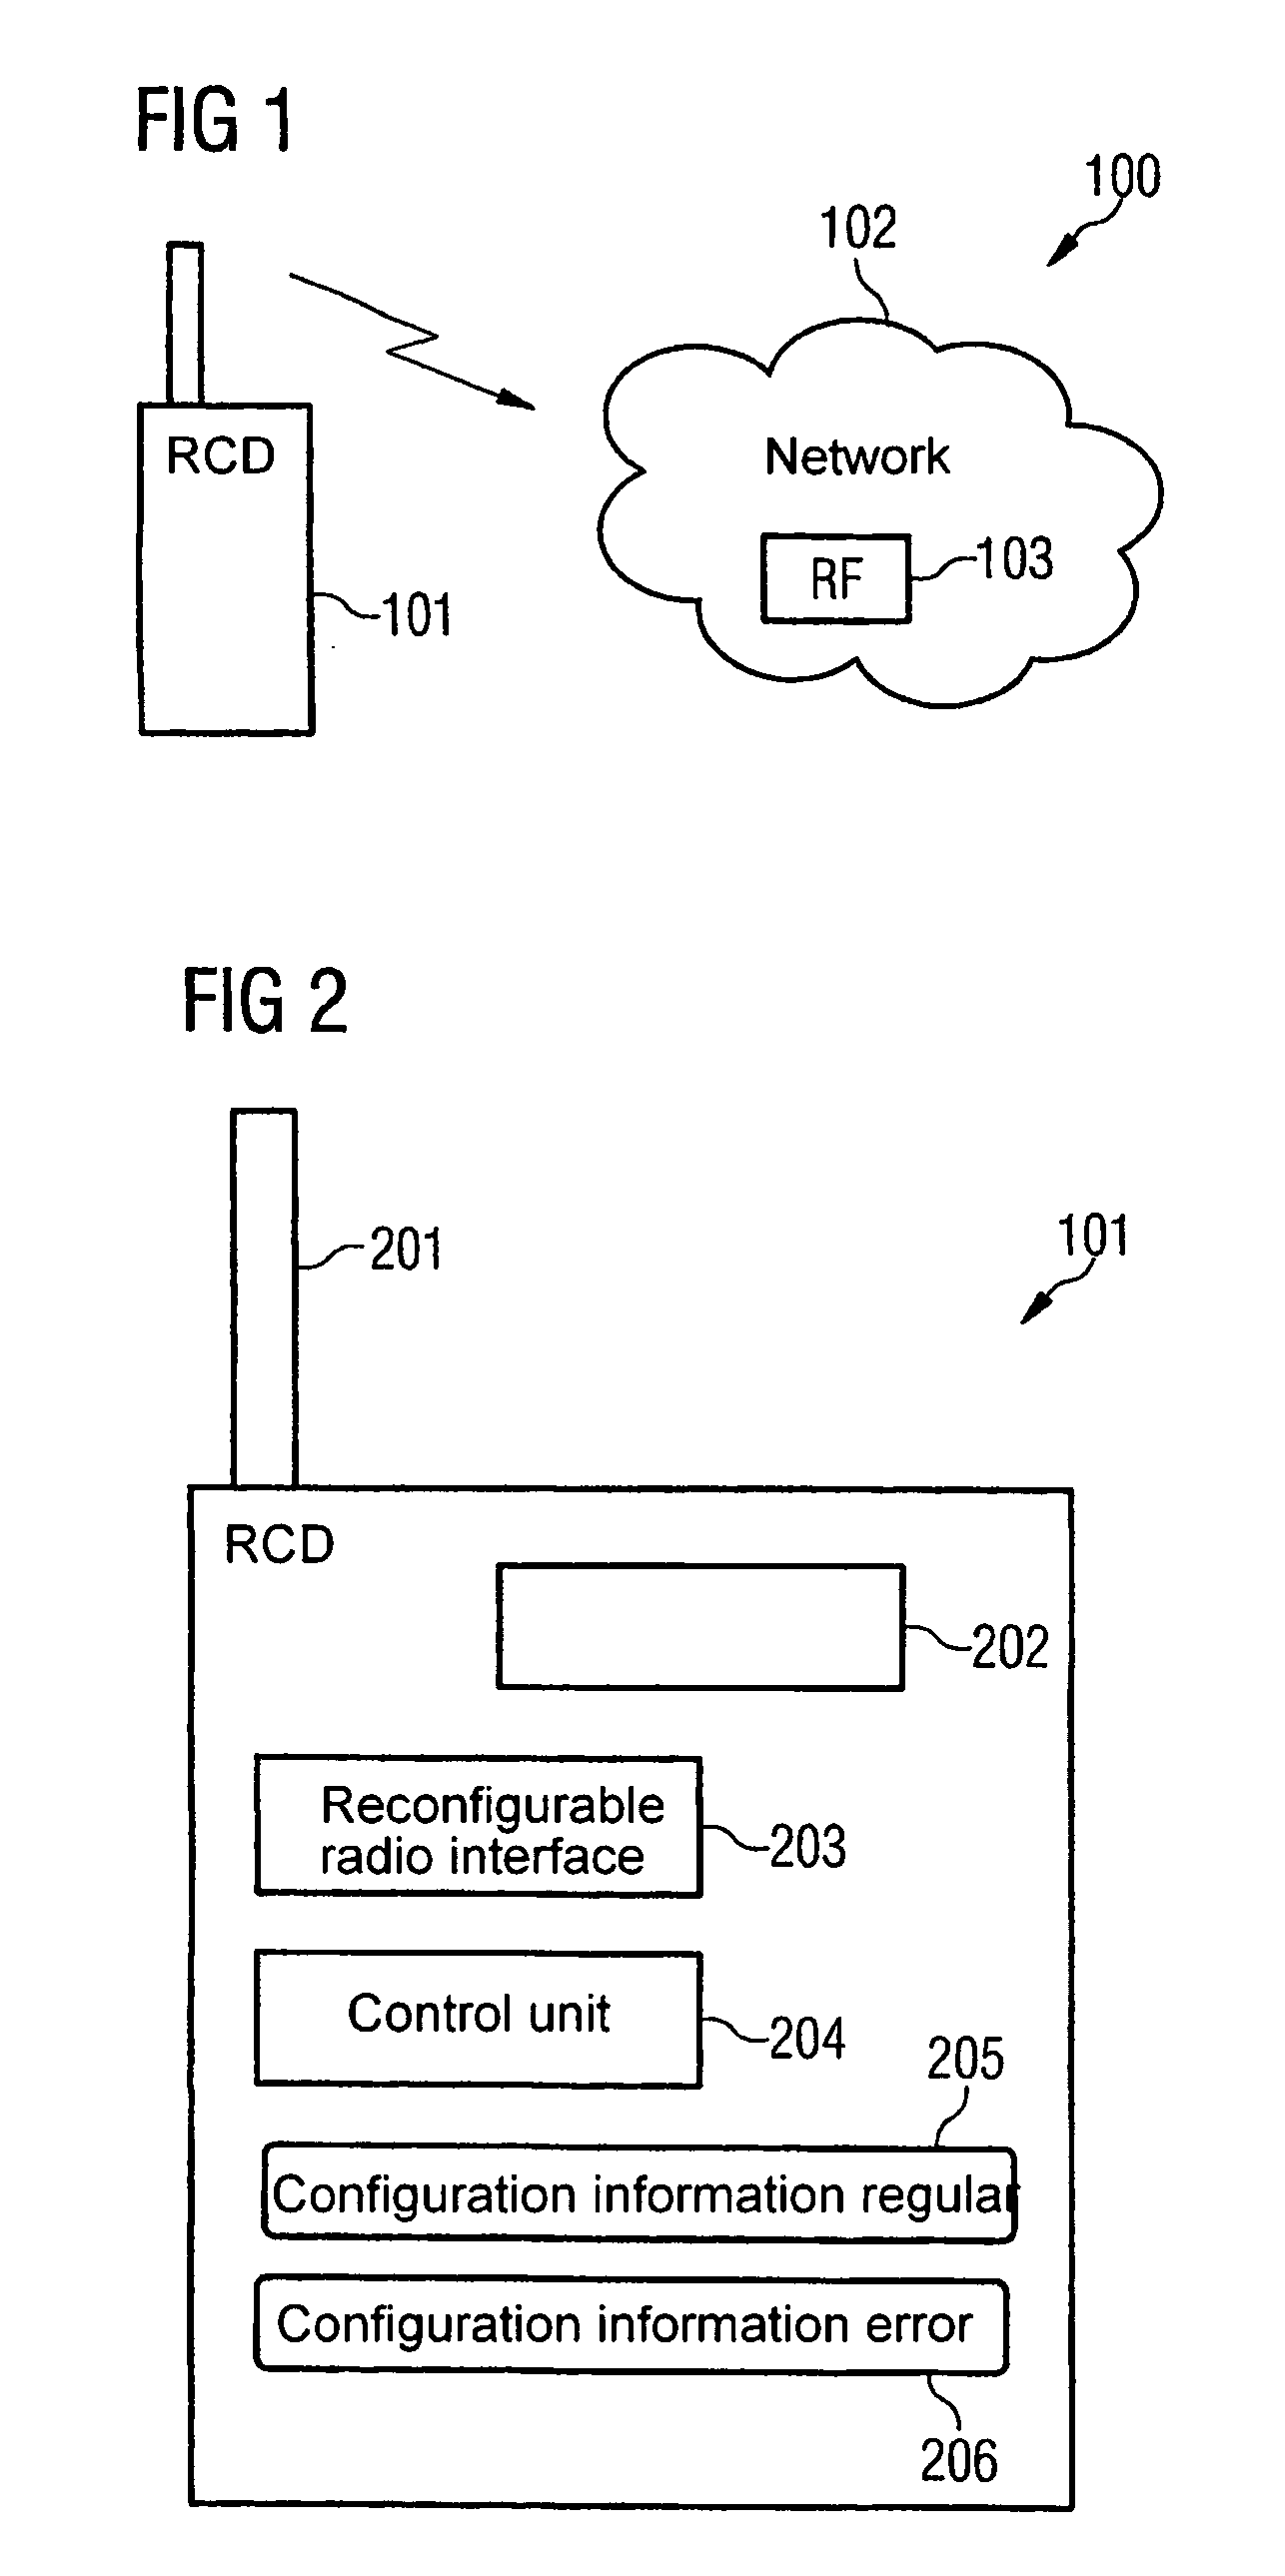 Reconfigurable radio system with error recognition and treatment